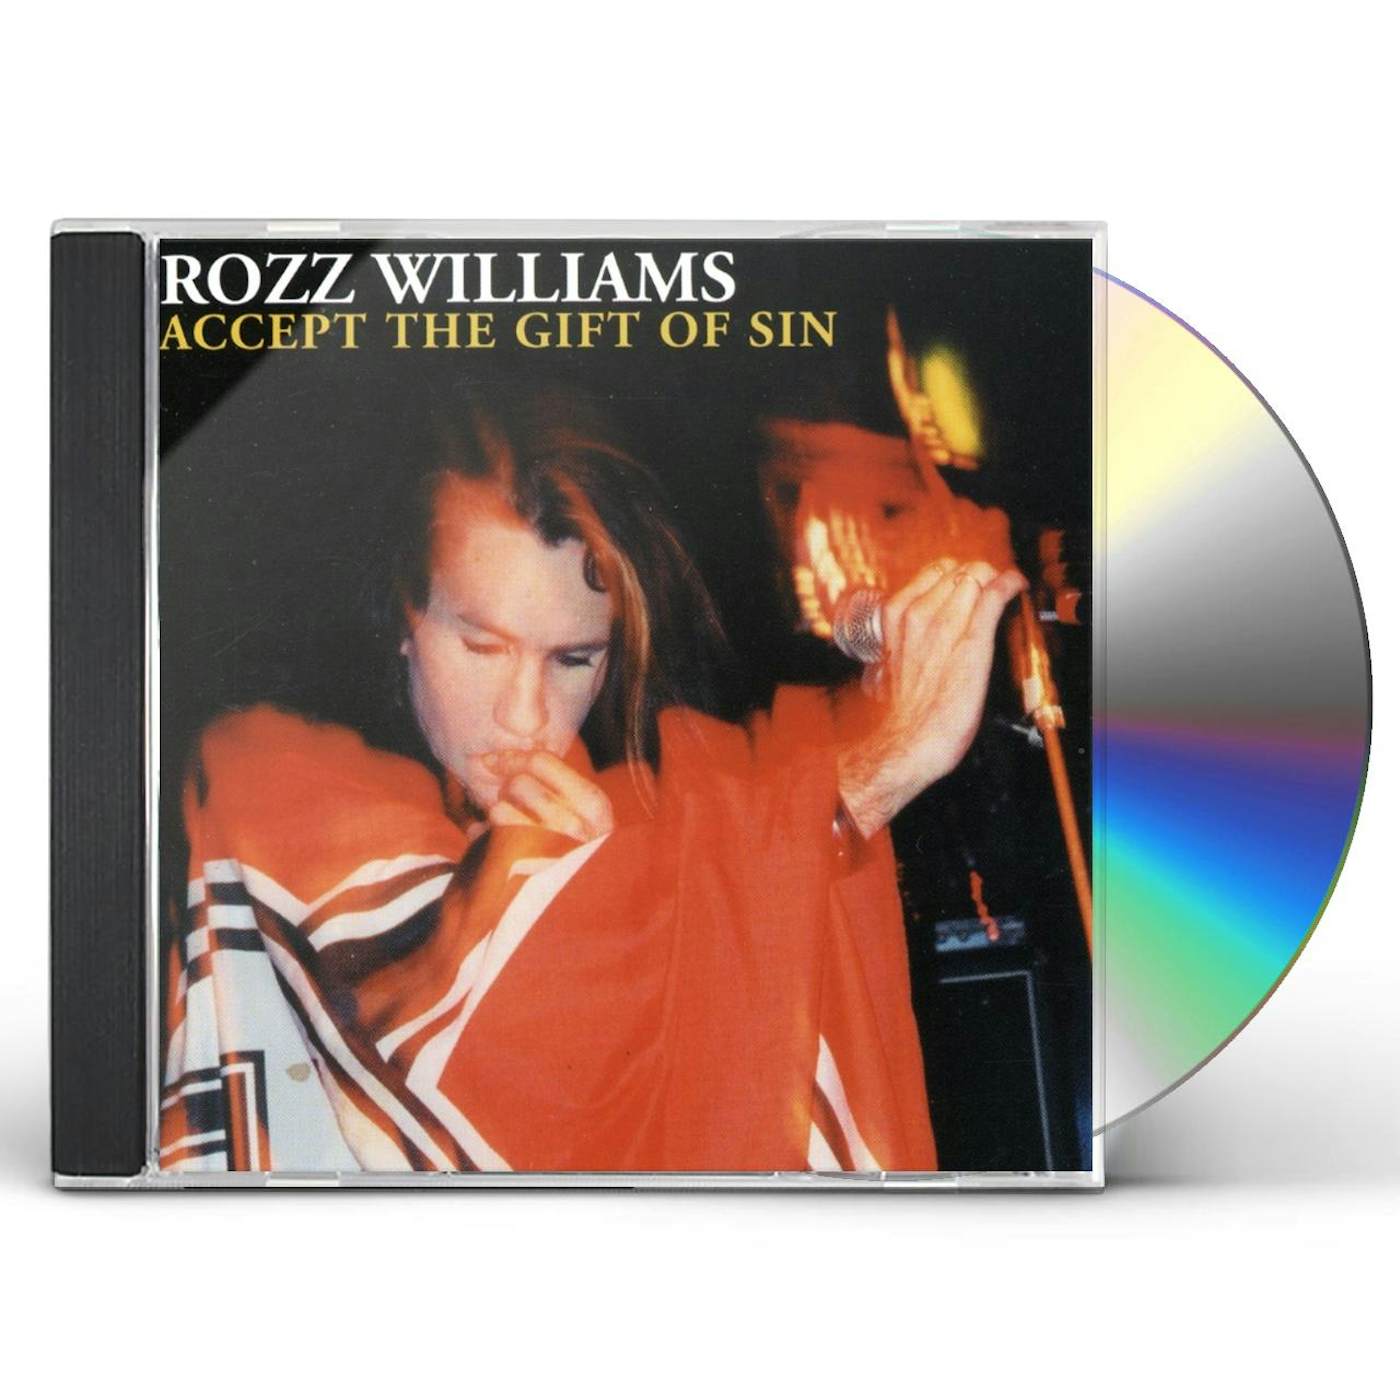 Rozz Williams ACCEPT THE GITF OF SIN CD